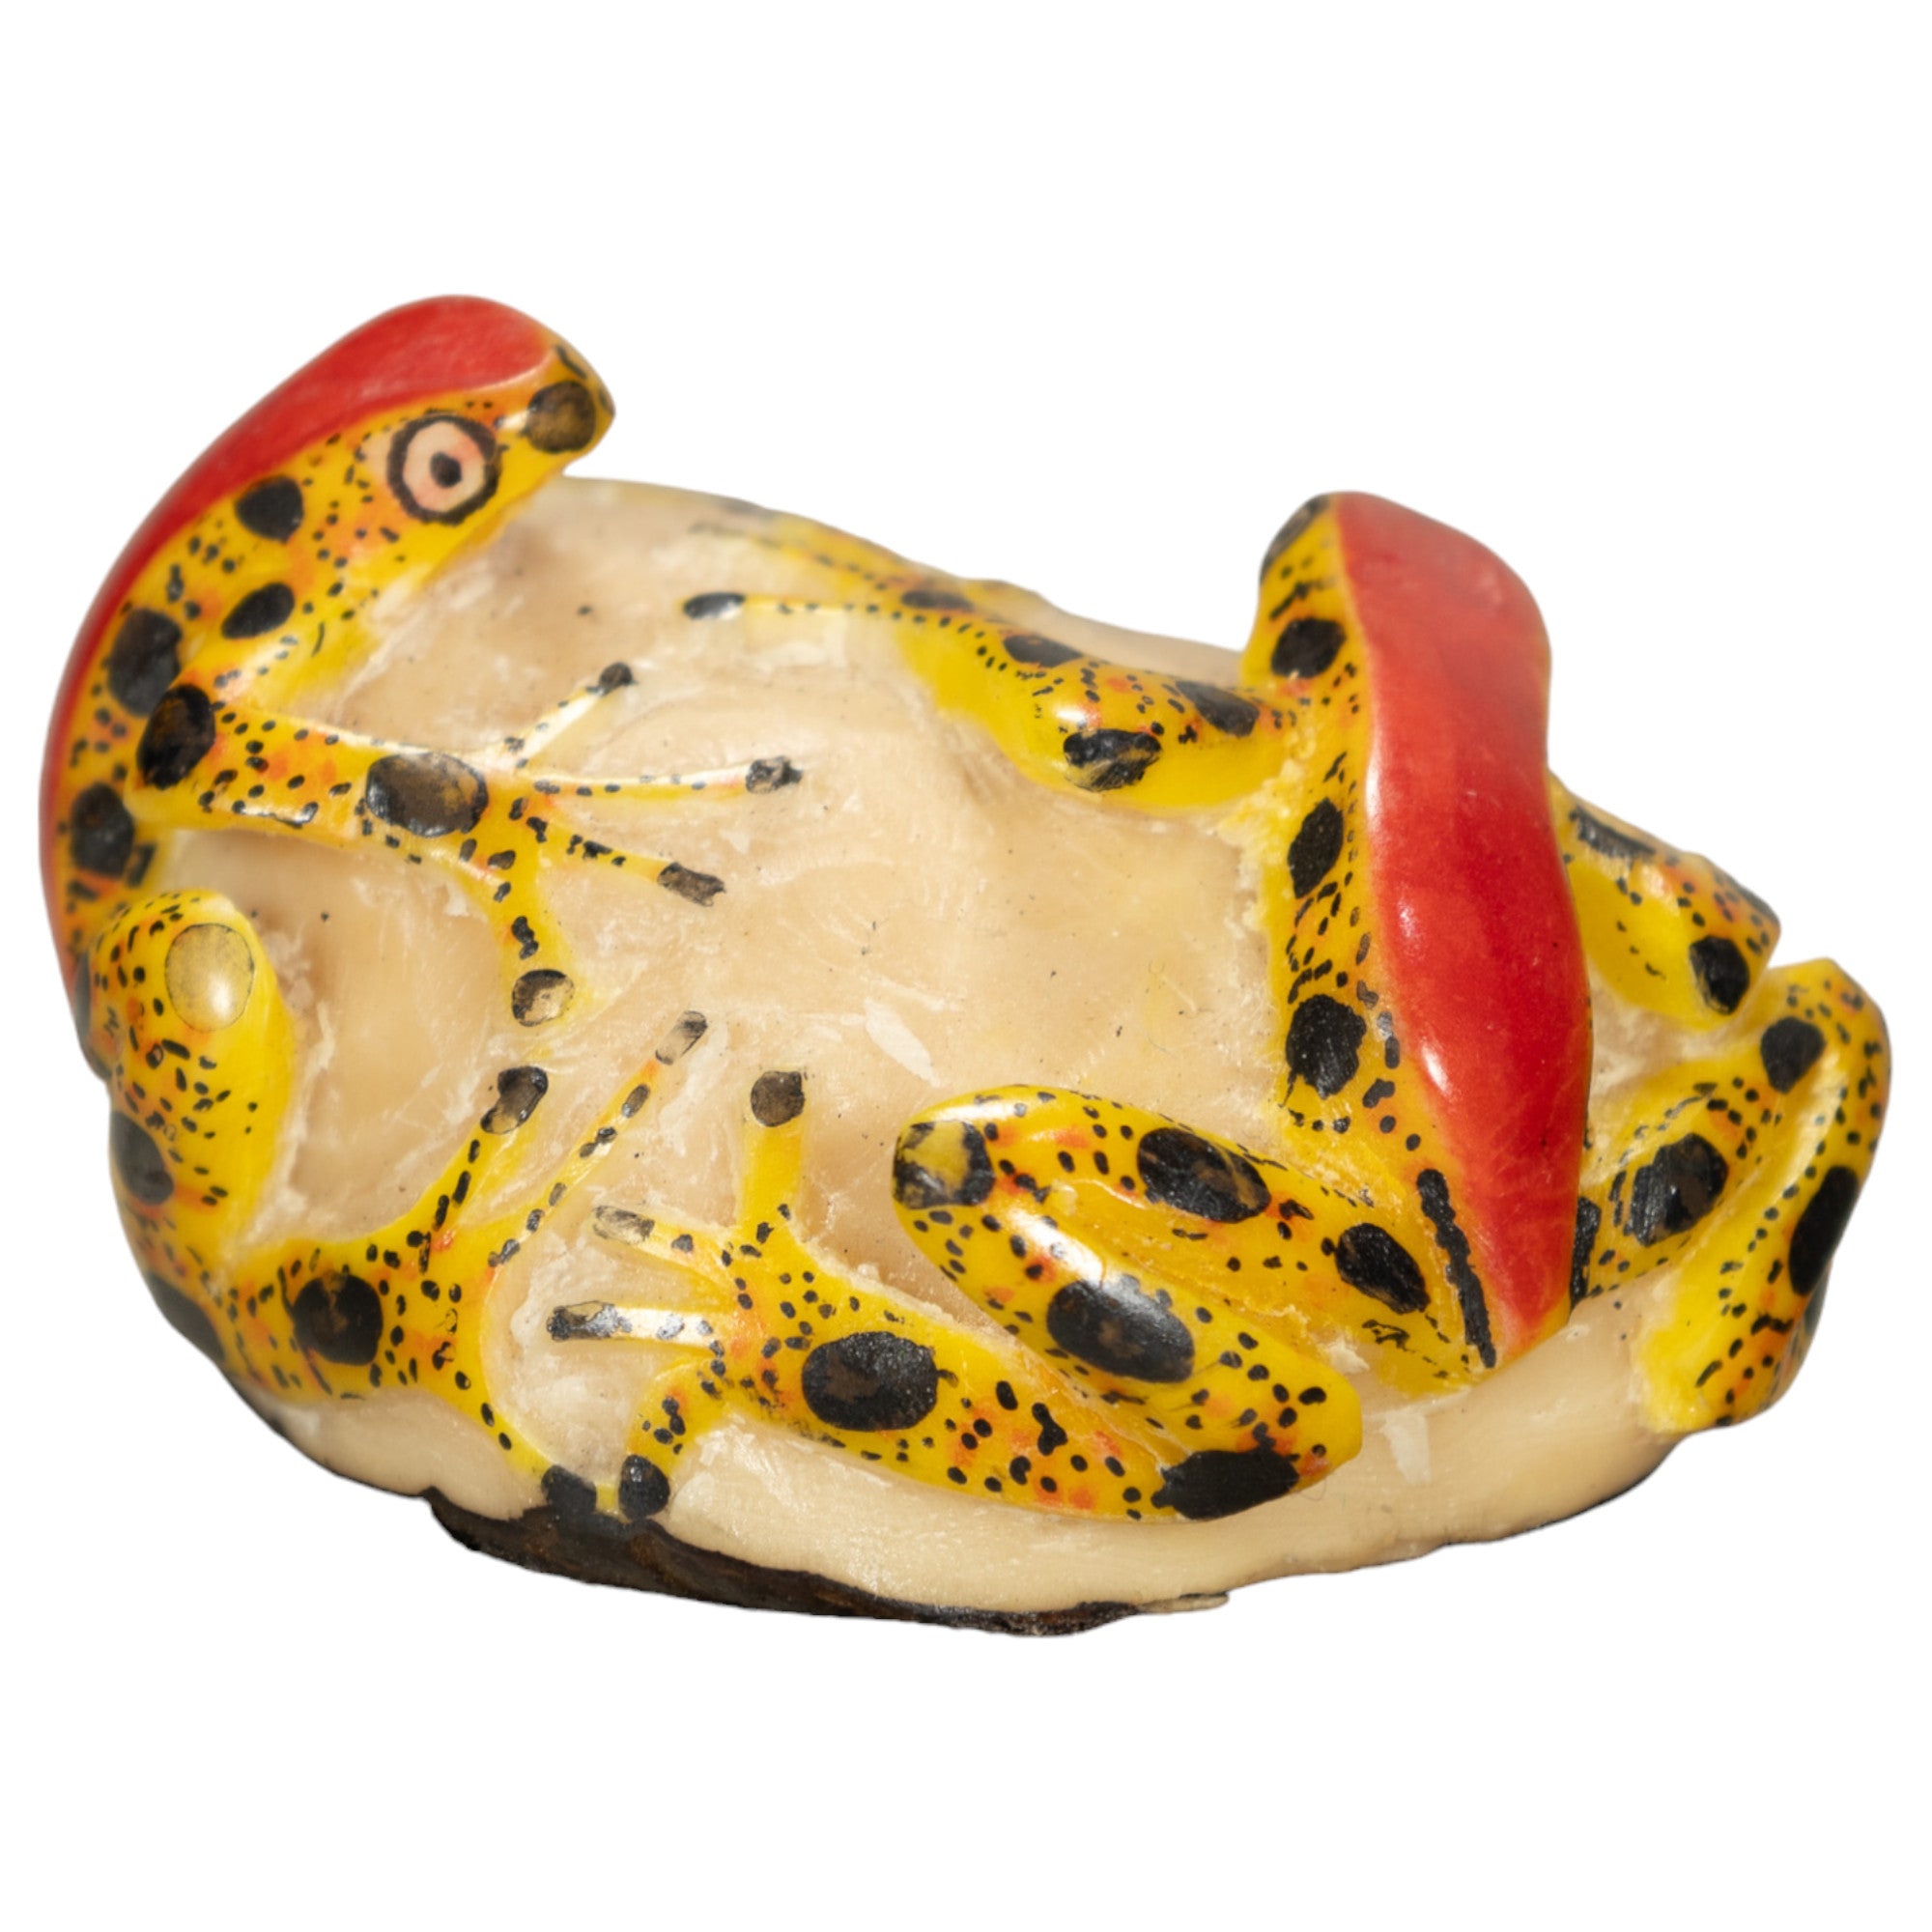 Two Poison Dart Frog Tagua Nut Carving